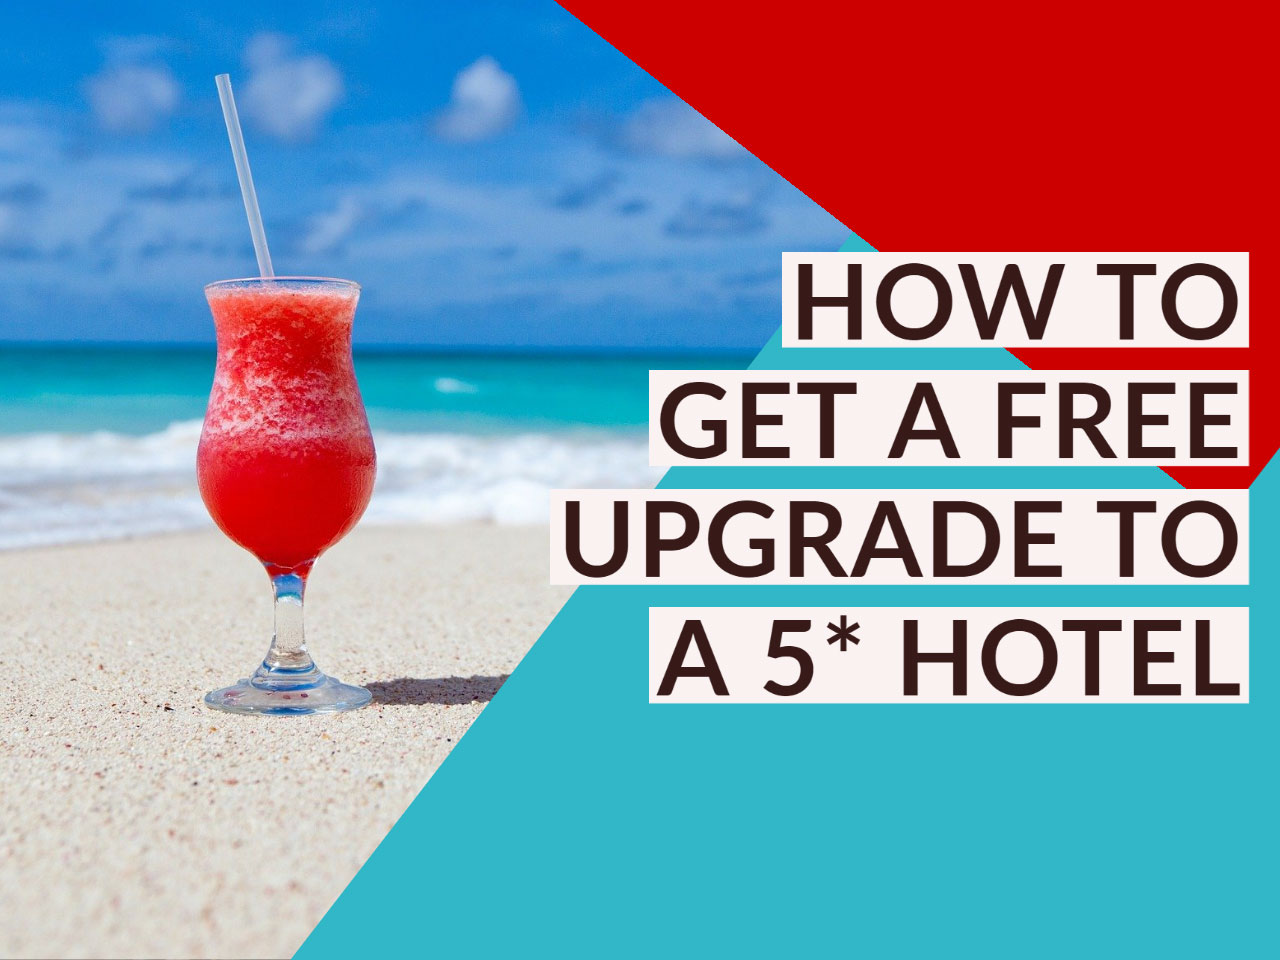 How To Get a Free Upgrade to a 5 Star Hotel